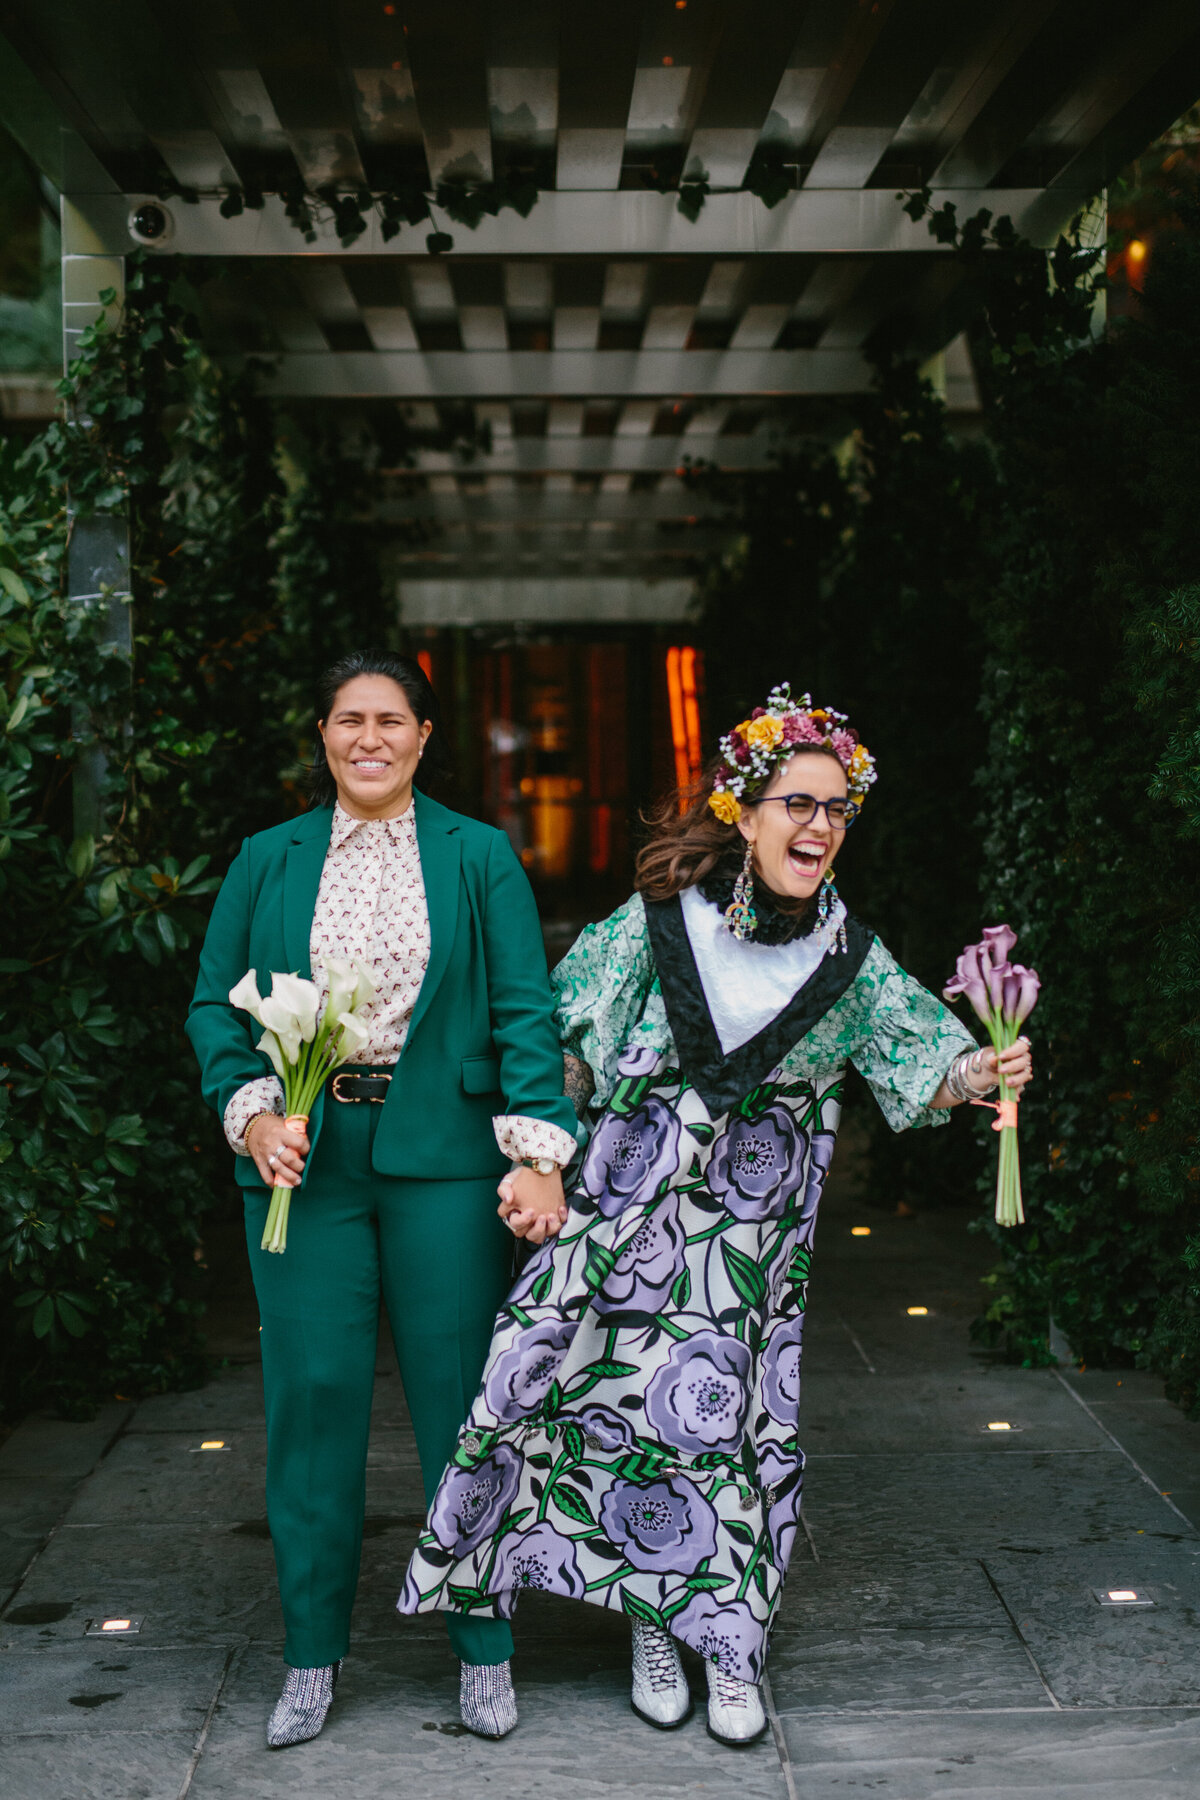 high-res-ez-powers-nyc-wedding-photographer-queer-trans-photography-18